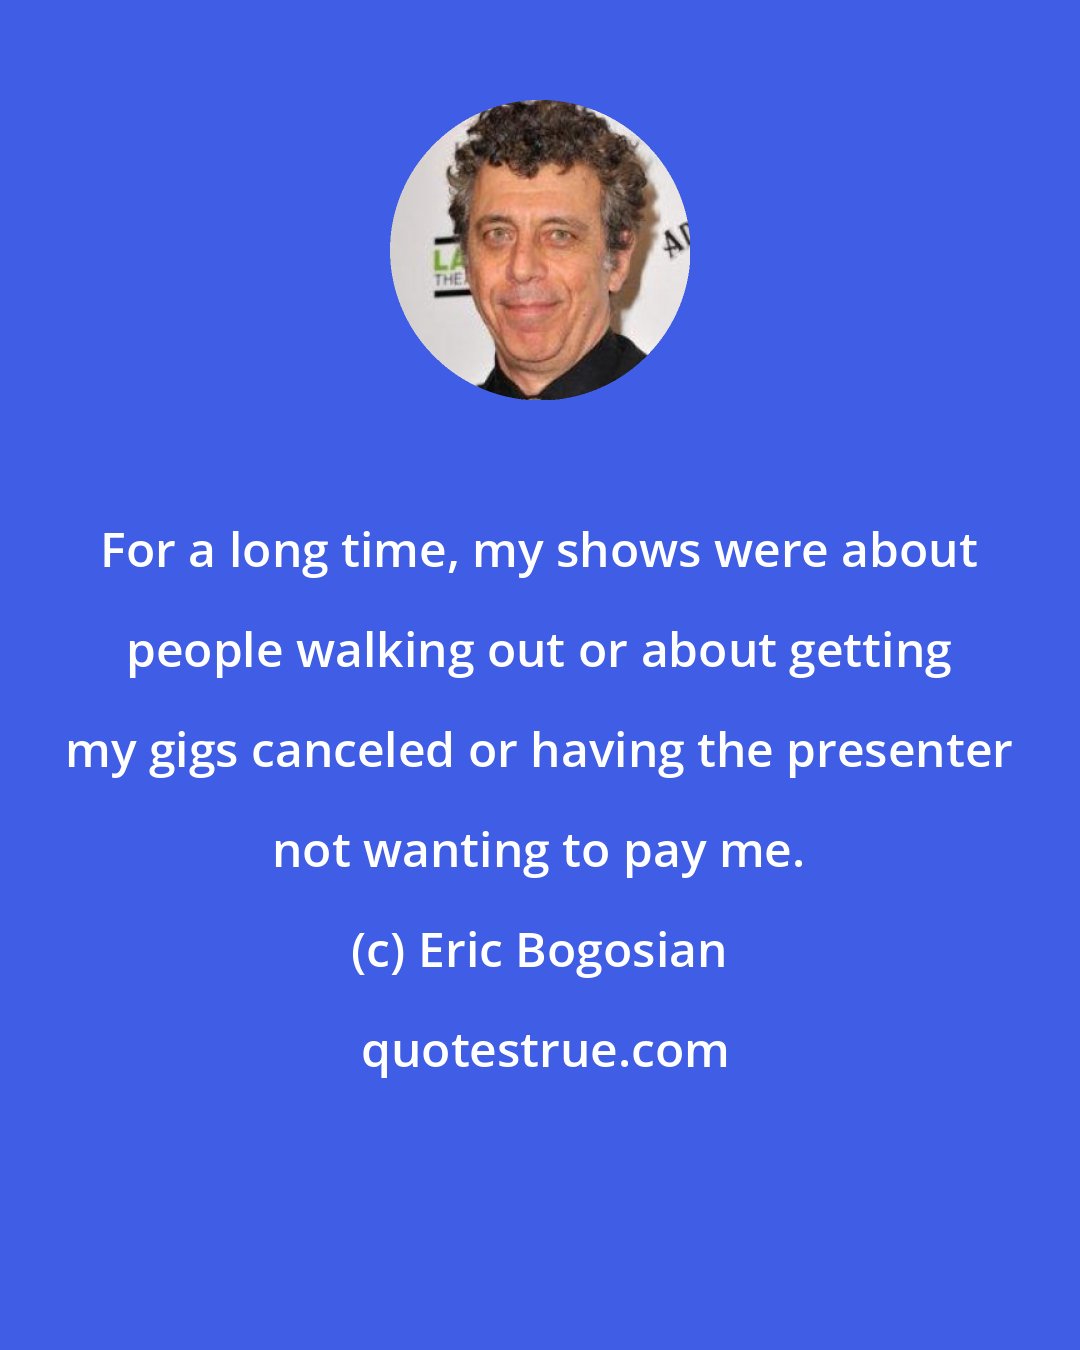 Eric Bogosian: For a long time, my shows were about people walking out or about getting my gigs canceled or having the presenter not wanting to pay me.